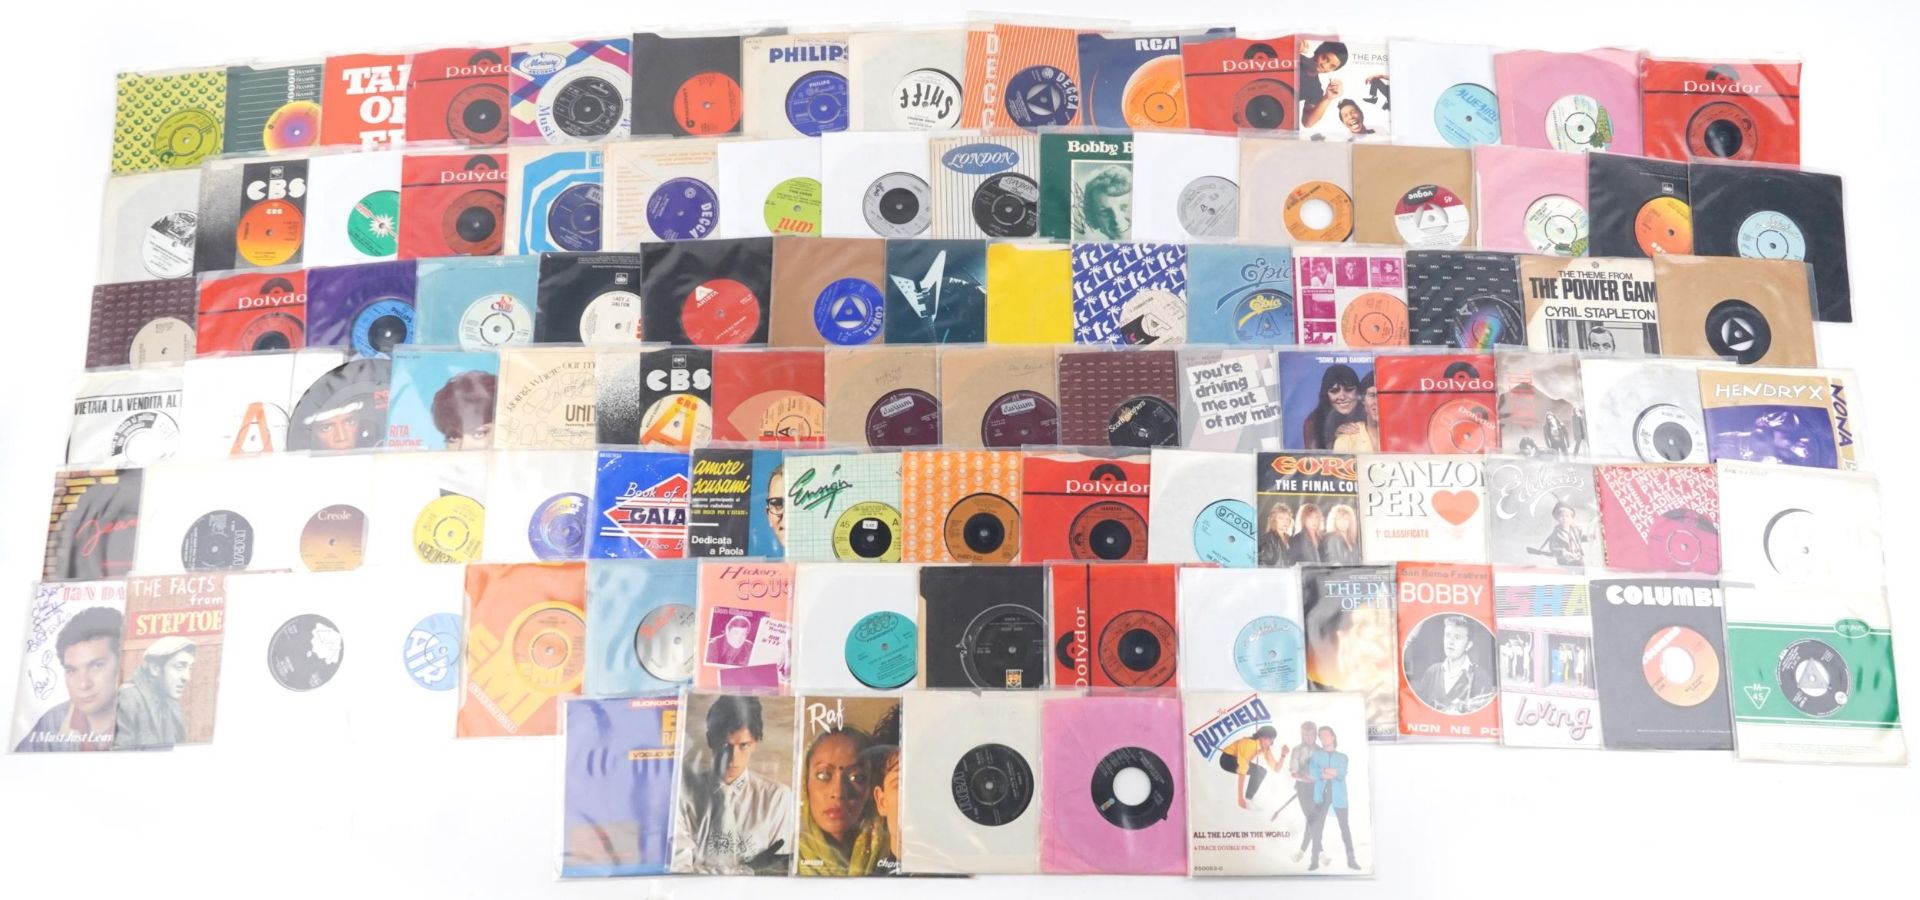 45rpm records including Steve Saxon, Kenny Nolan and Maurice Albert : For further information on